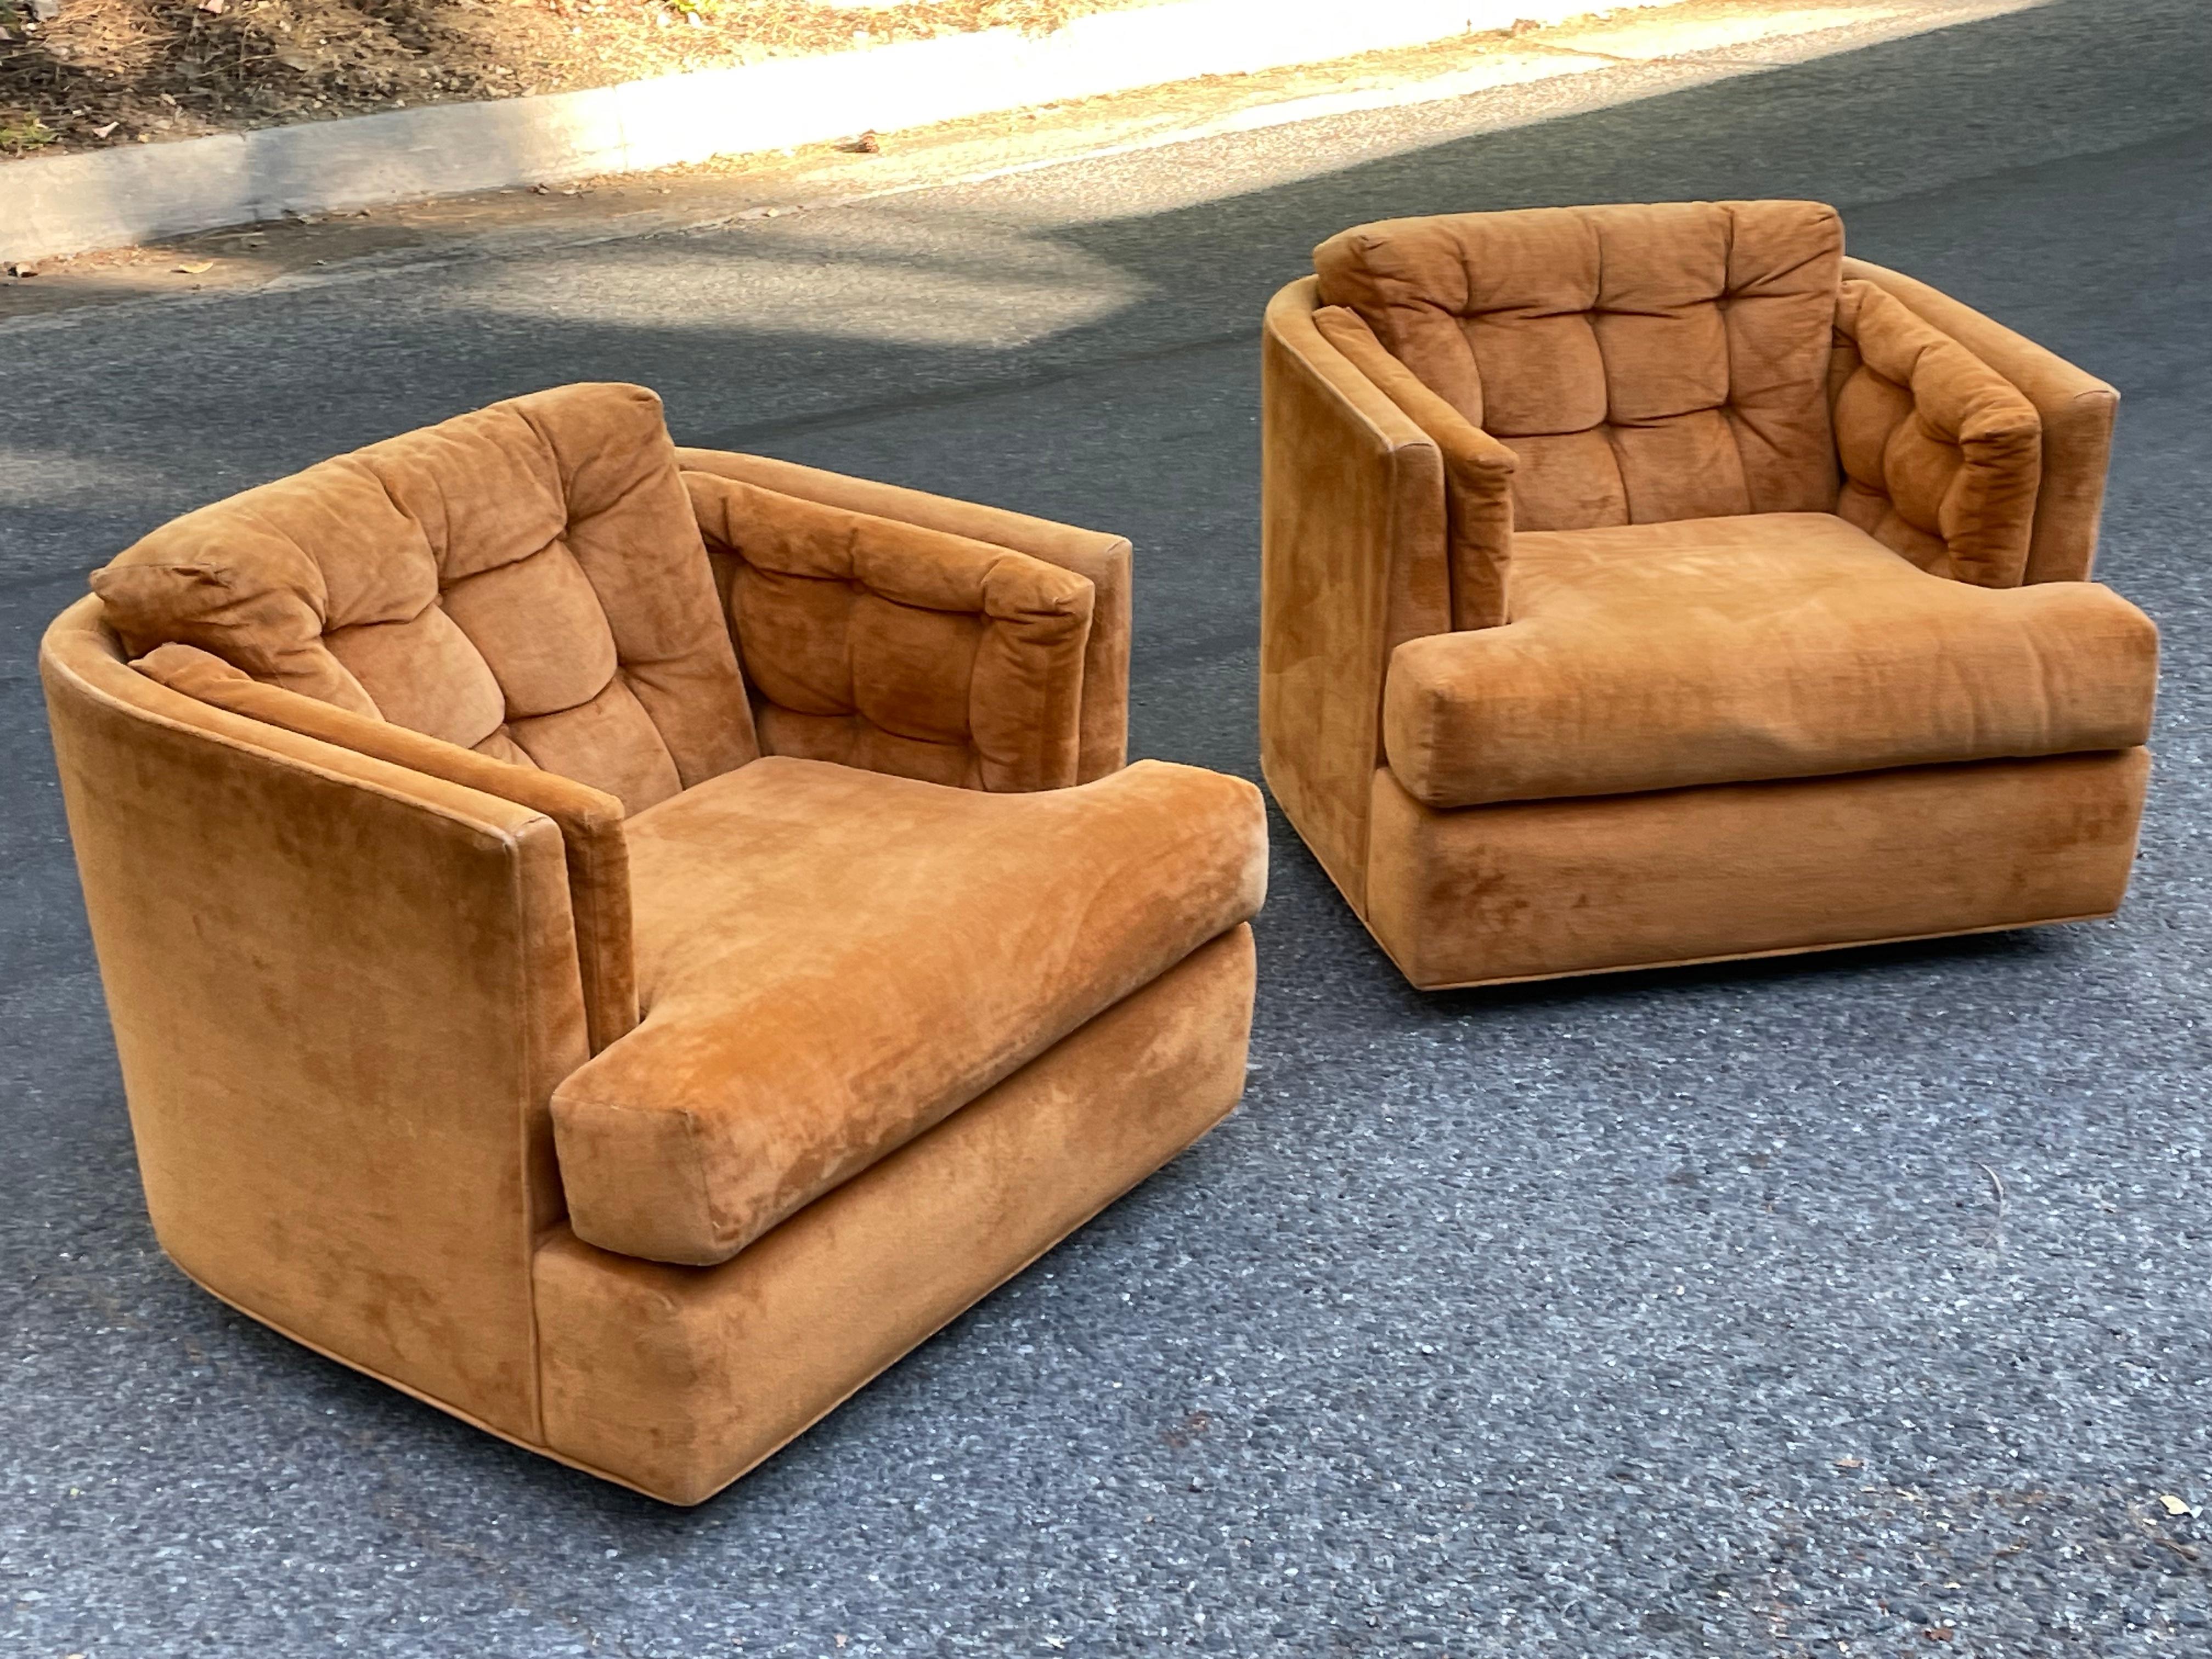 A stunning pair of Milo Baughman orange swivel lounge chairs in original fabric.

We're currently pairing these chairs with a brass Mastercraft coffee table and a Jorge Zalszupin rosewood desk. 

Dimensions: 33 in. x 33 x 26

Very good vintage